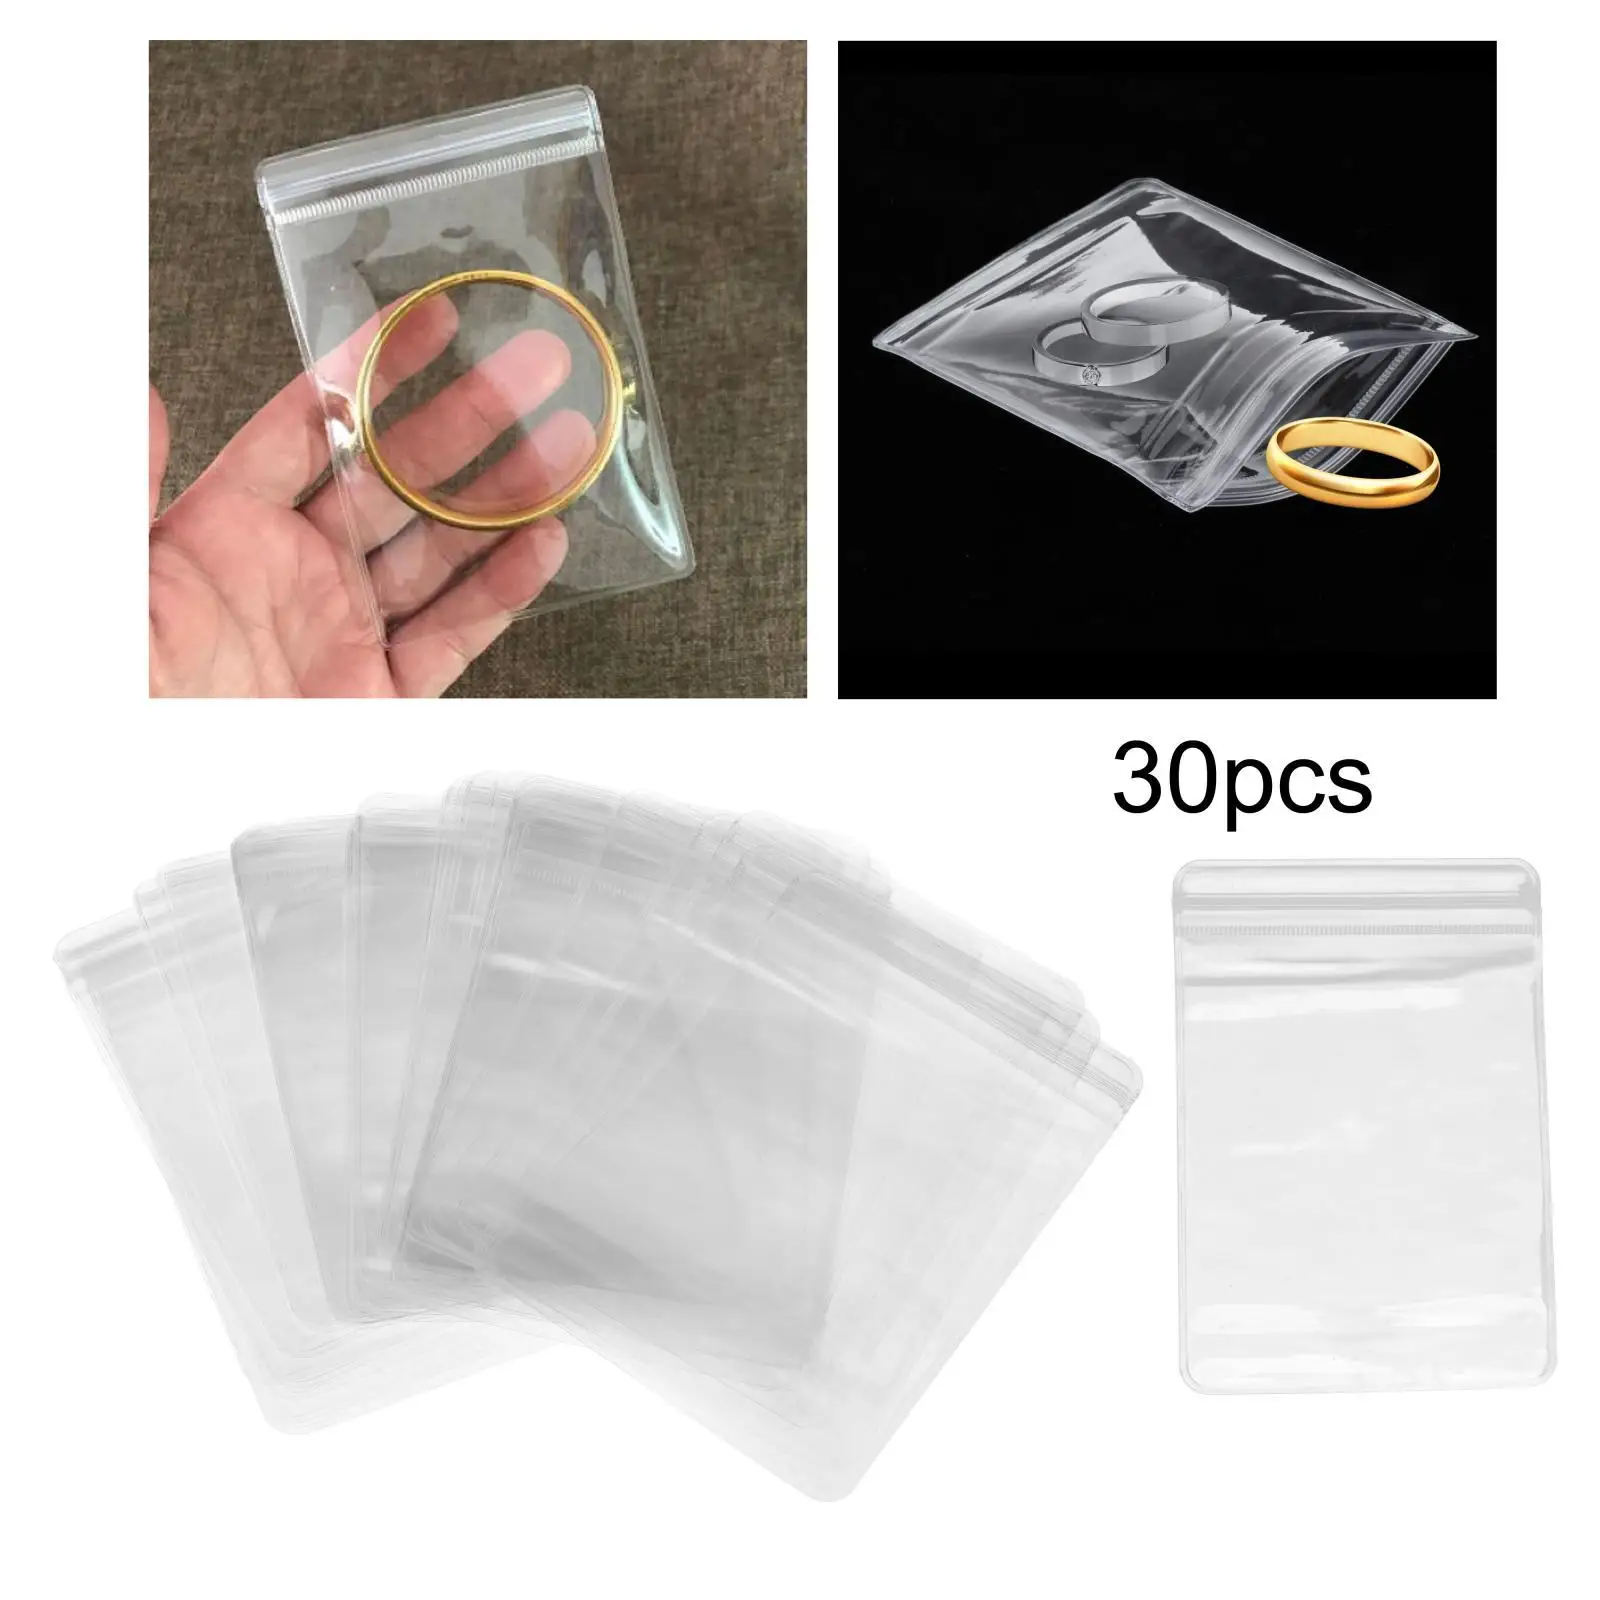 30Pieces Jewelry Storage Bags Clear Reusable Waterproof Small Packing Pouch for Holding Jewelry Rings Crafts Necklace Earrings